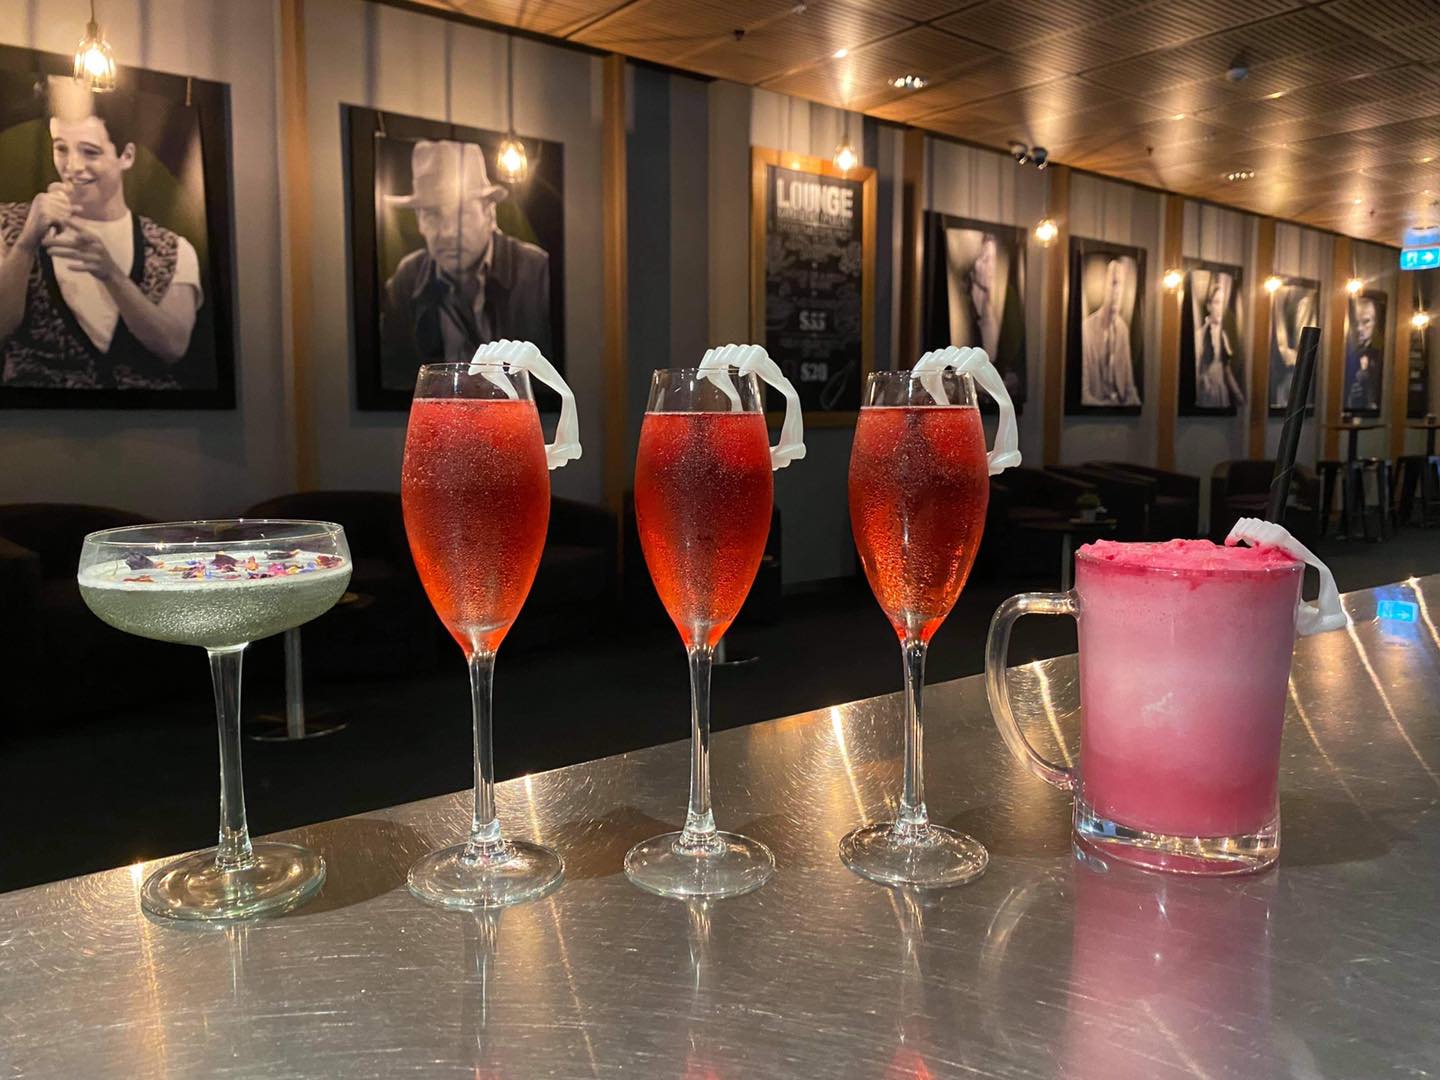 Twilight themed cocktails at Limelight Cinemas